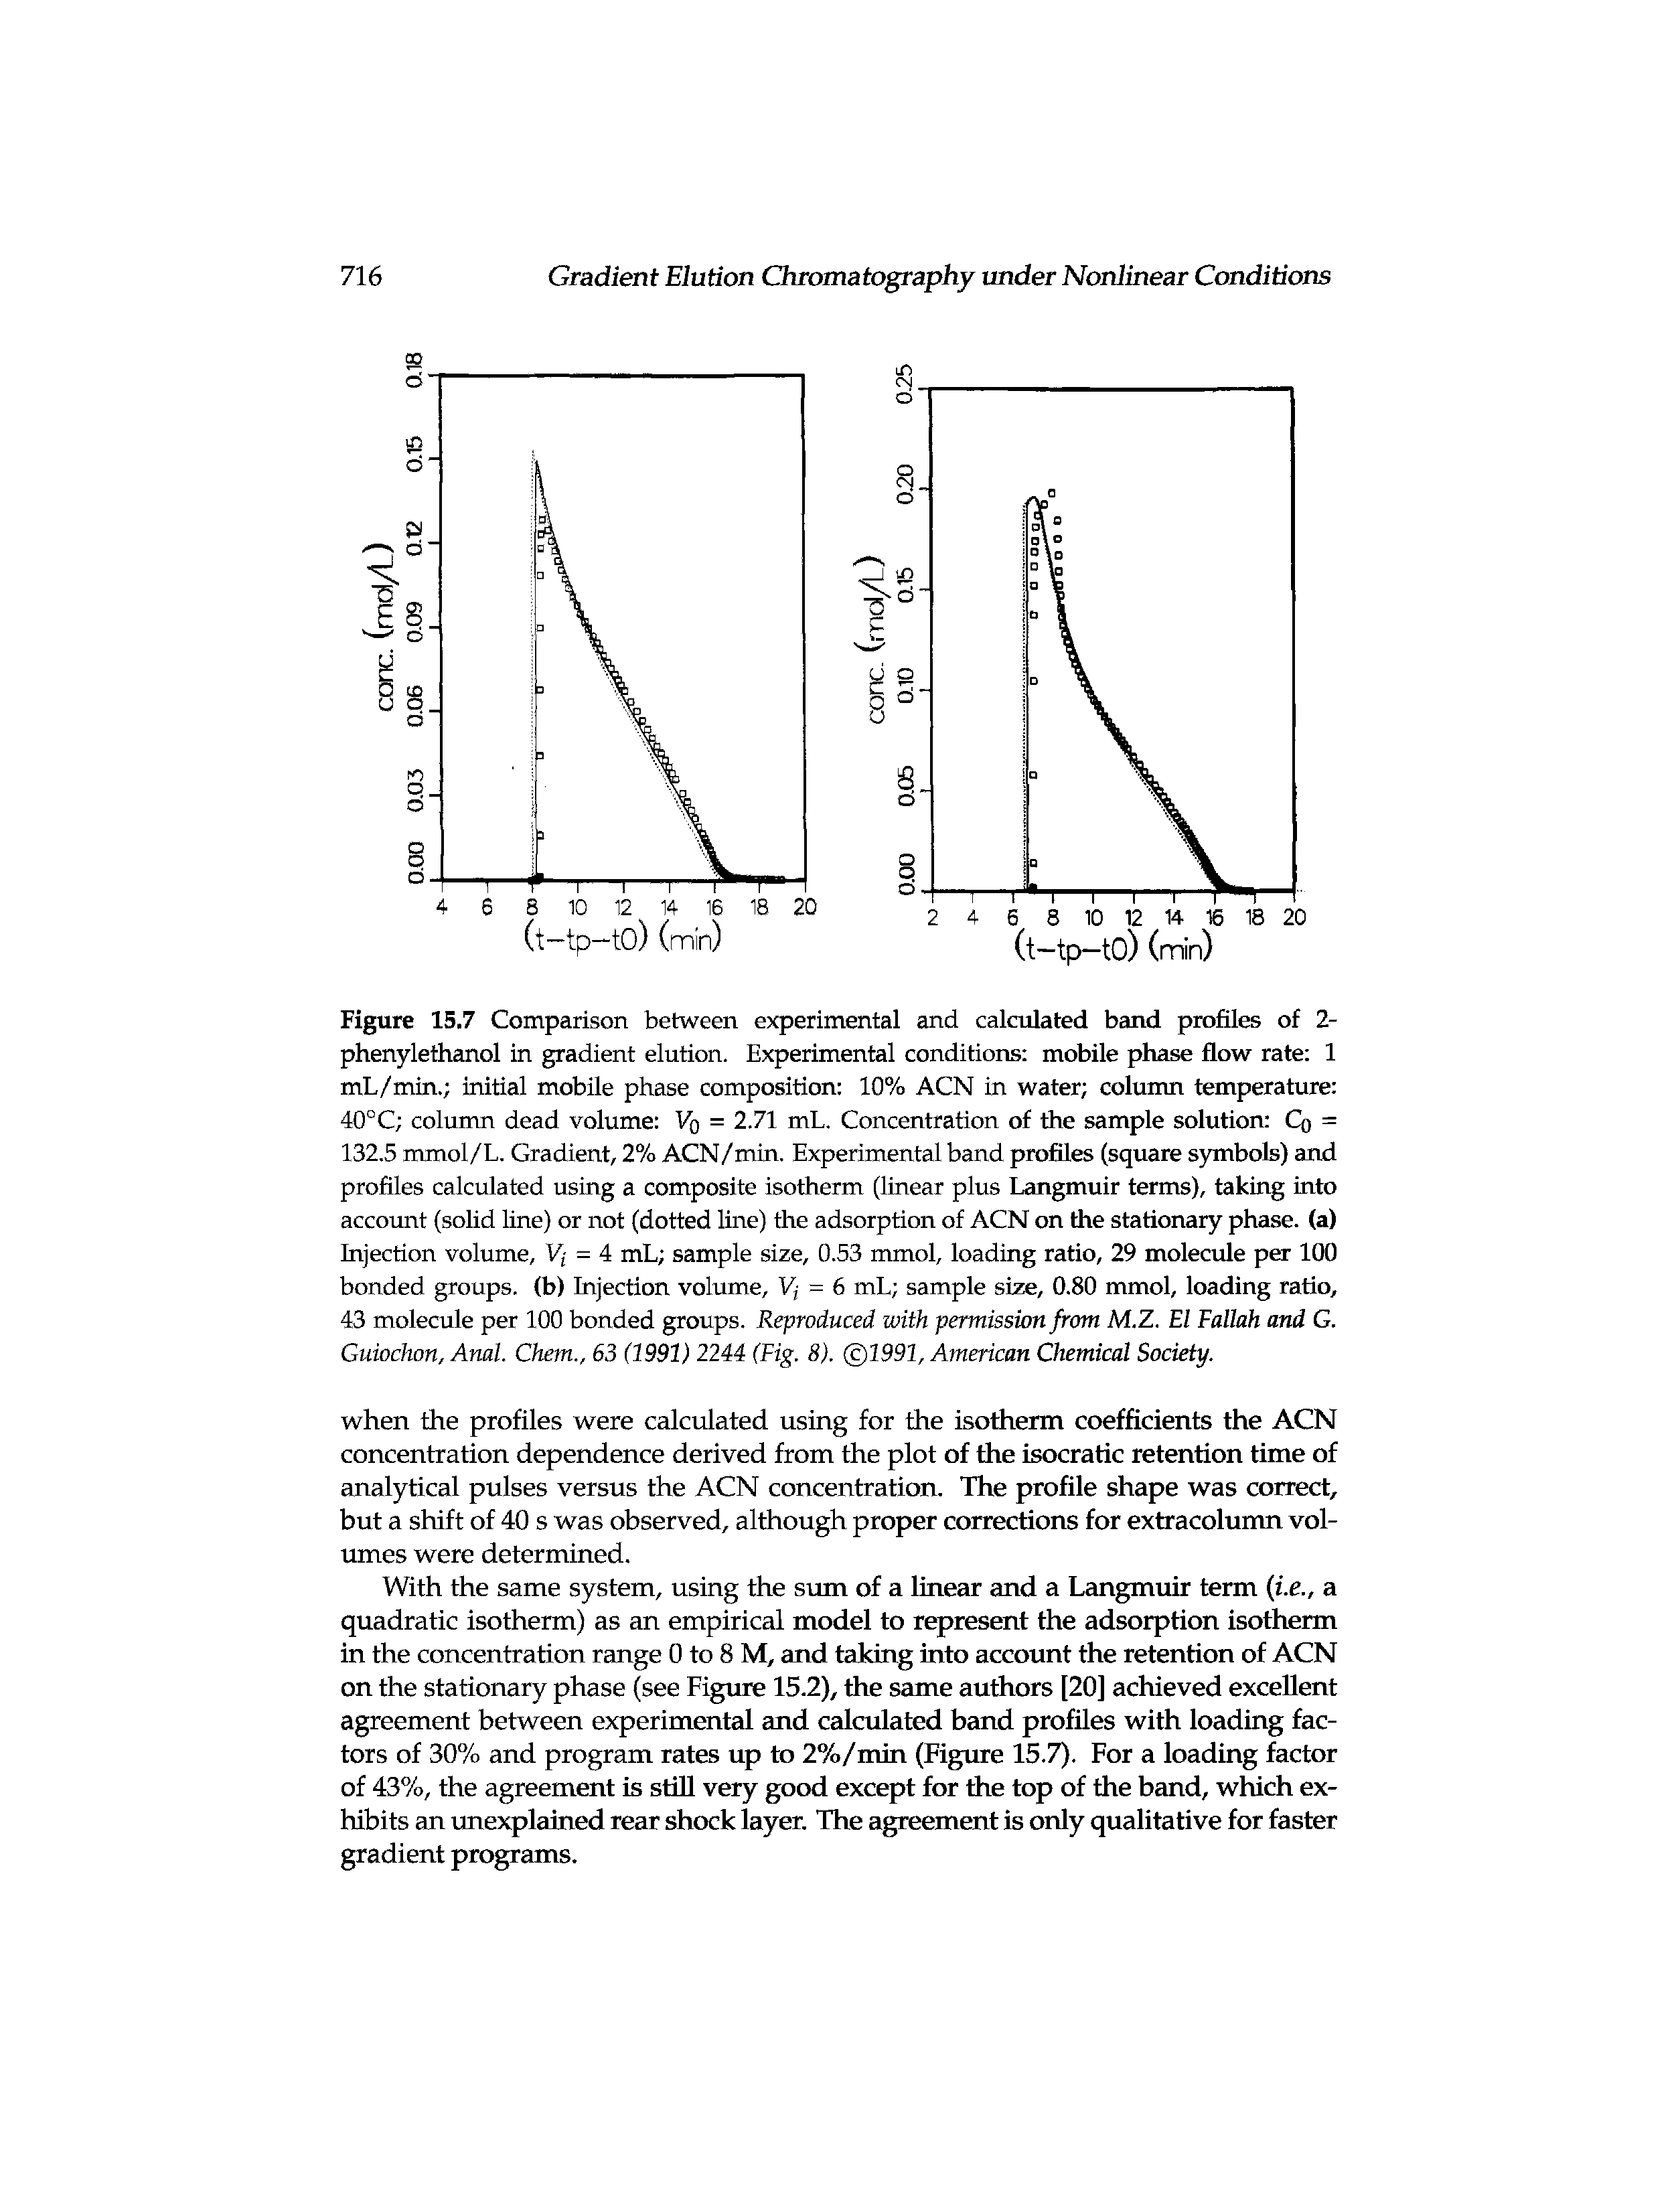 Figure 15.7 Comparison between experimental and calculated band profiles of 2-phenylethanol in gradient elution. Experimental conditions mobile phase flow rate 1 mL/min. initial mobile phase composition 10% ACN in water column temperature 40°C column dead volume Vq = 2.71 mL. Concentration of the sample solution Cq = 132.5 mmol/L. Gradient, 2% ACN/min. Experimental band profiles (square symbols) and profiles calculated using a composite isotherm (linear plus Langmuir terms), taking into account (solid line) or not (dotted line) the adsorption of ACN on the stationary phase, (a) Injection volume, Vj = 4 mL sample size, 0.53 mmol, loading ratio, 29 molecule per 100 bonded groups, (b) Injection volume, Vj = 6 mL sample size, 0.80 mmol, loading ratio, 43 molecule per 100 bonded groups. Reproduced with permission from M.Z. El Fallah and G. Guiochon, Anal. Chem., 63 (1991) 2244 (Fig. 8). ( 1991, American Chemical Society.